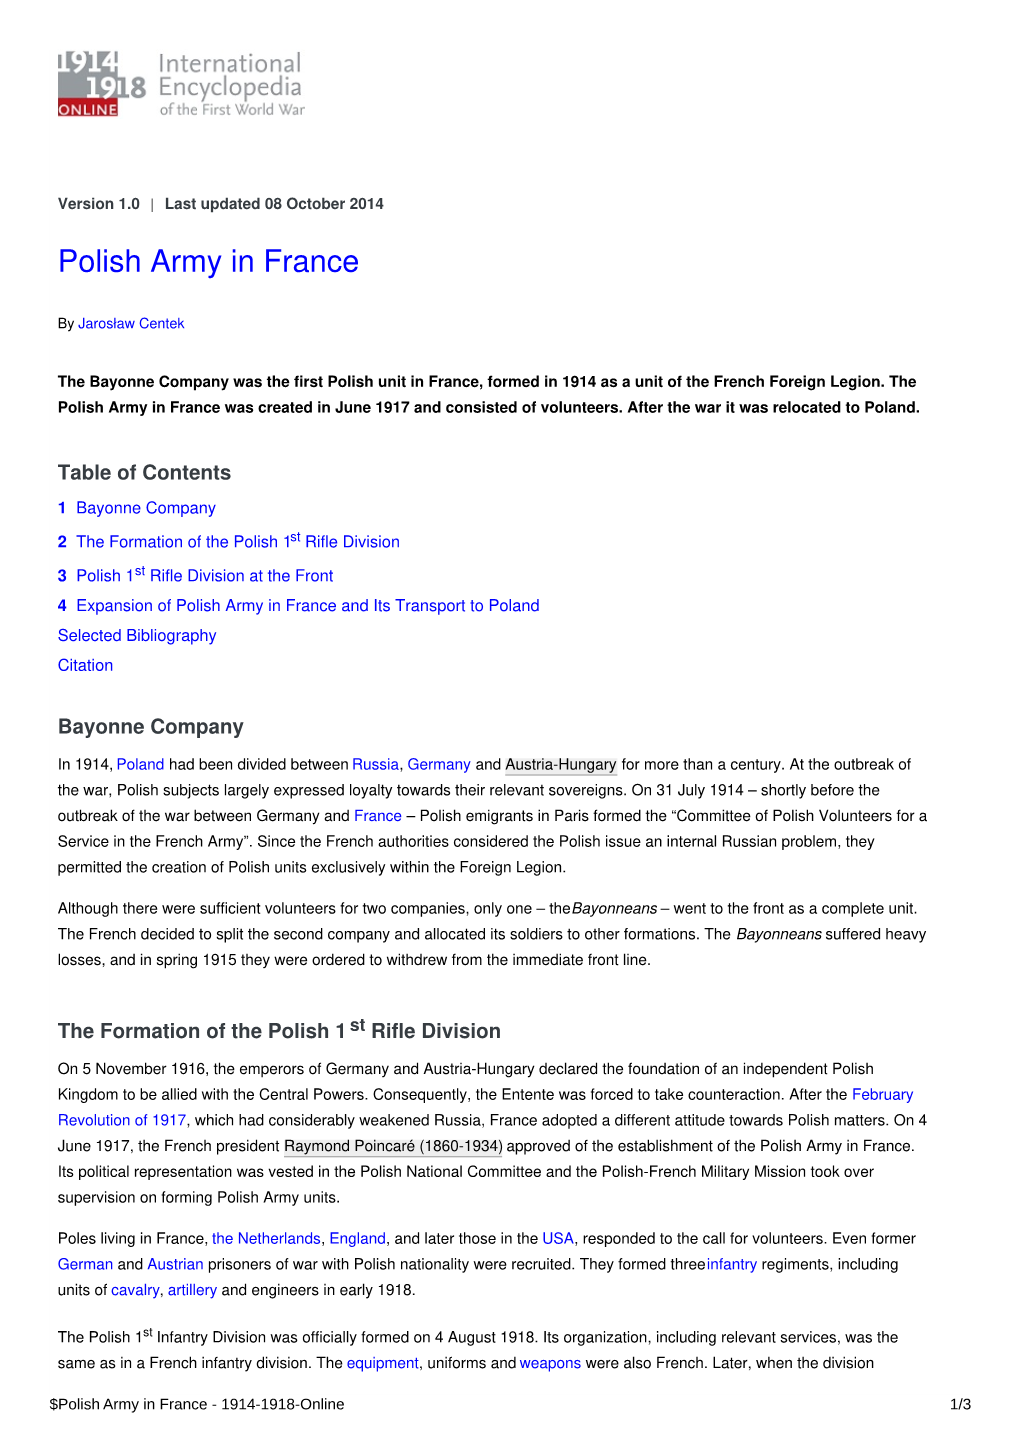 Polish Army in France | International Encyclopedia of the First World